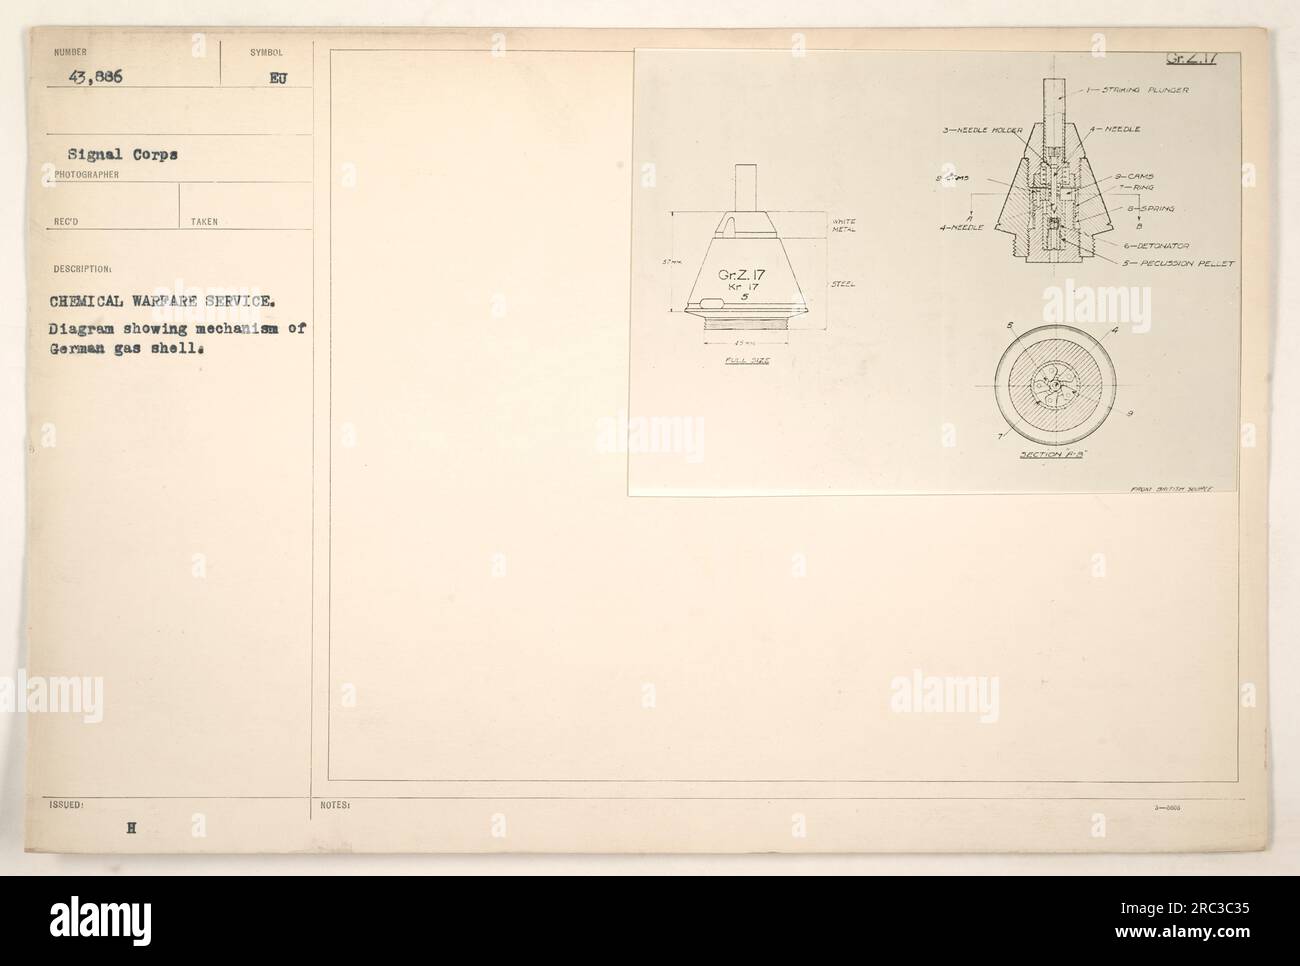 Caption for the image: 'Diagram showing the mechanism of a German gas shell used during World War I. The diagram highlights the various components and features including a 3-needle holoka 2 injection system, string plunger, and a percussion pellet. This information was important for the Chemical Warfare Service to understand and defend against enemy gas attacks.' Stock Photo